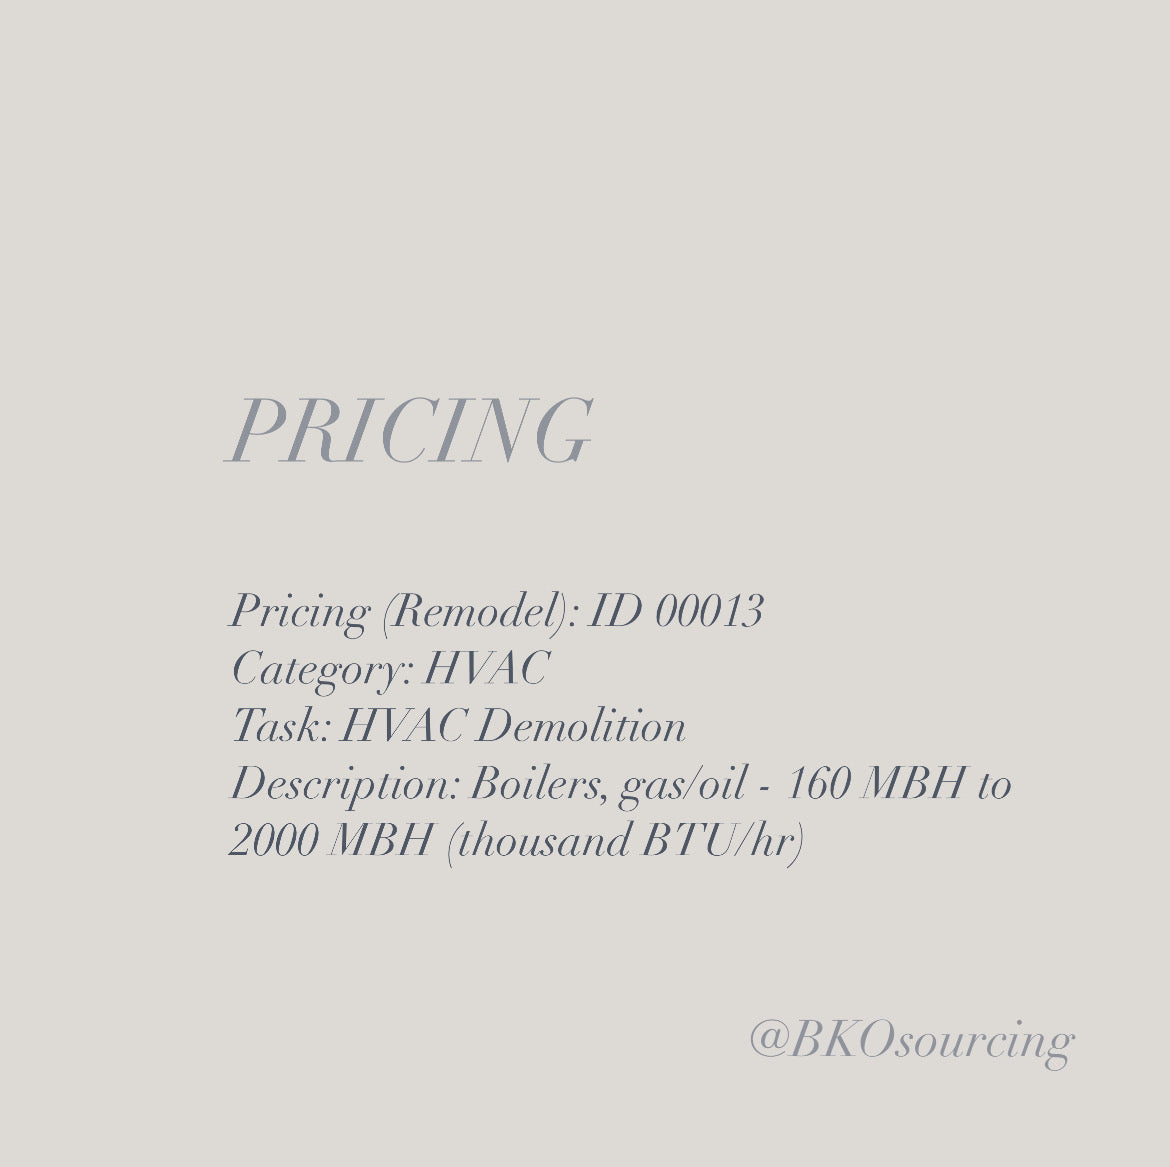 Pricing (Remodel) 00013 - HVAC - Demolition - Boilers, gas/oil 160 MBH to 2000 MBH - 2023-06OCT - with crew details